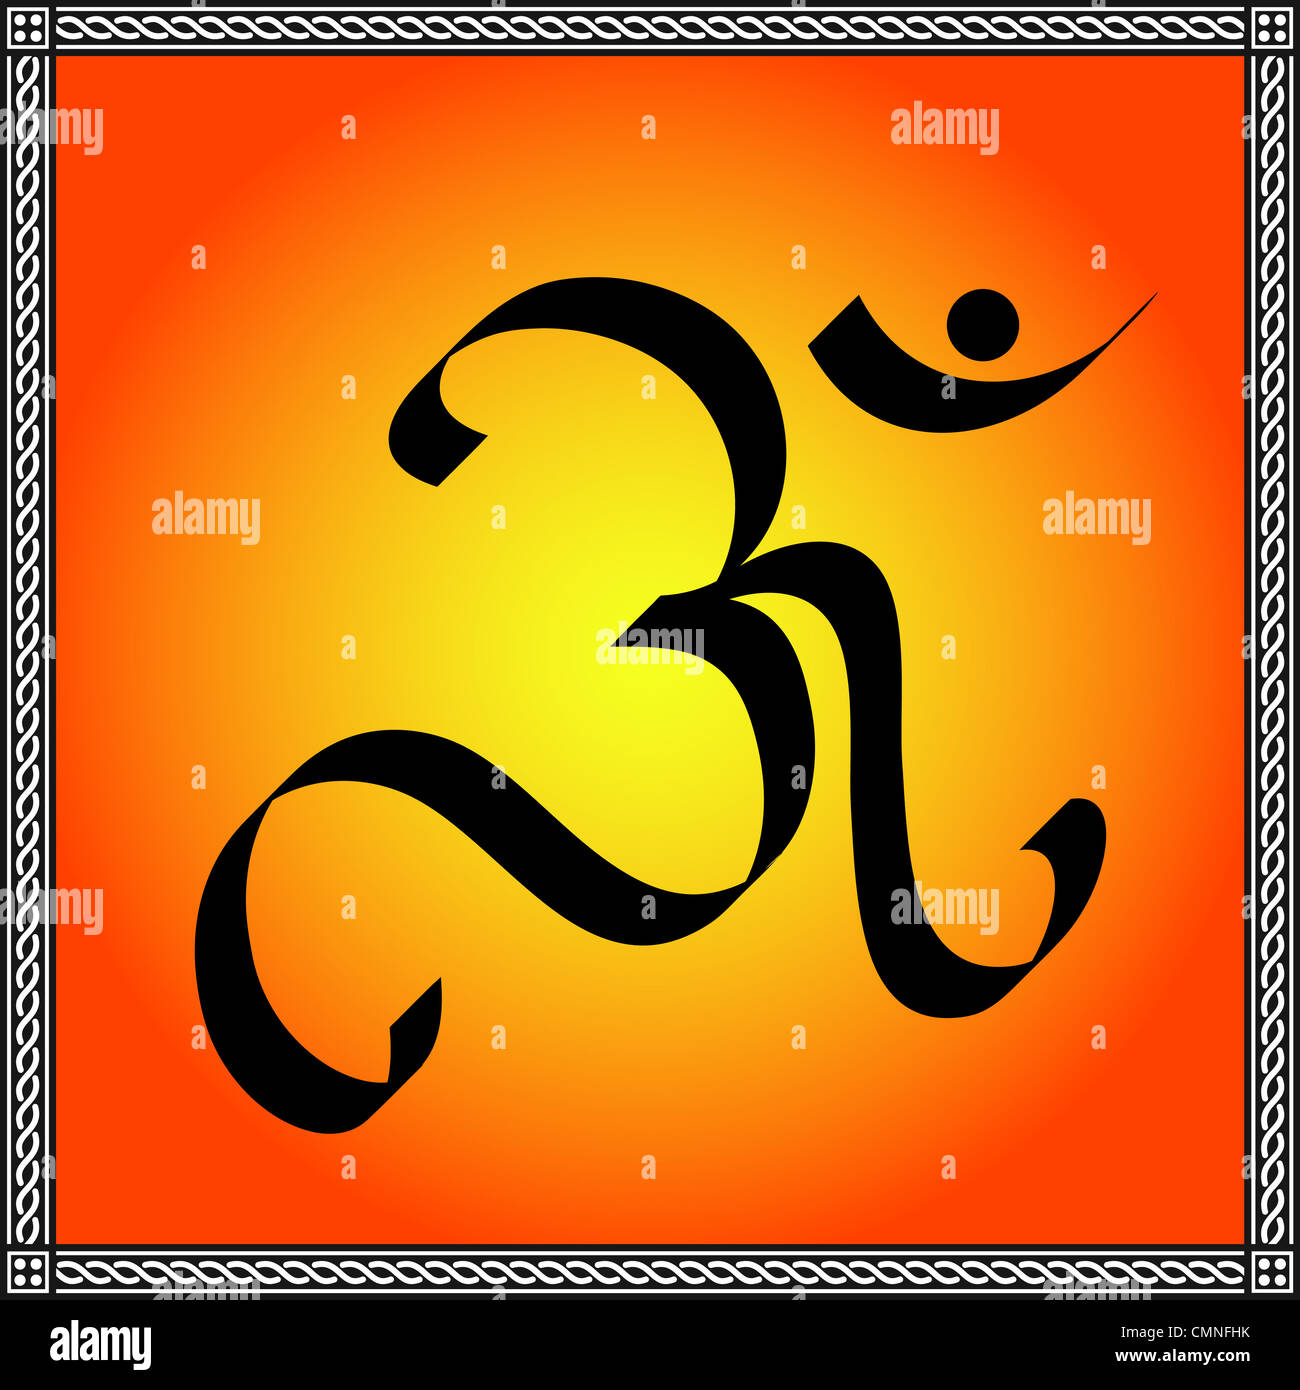 Indian divine OM symbol with frame Stock Photo